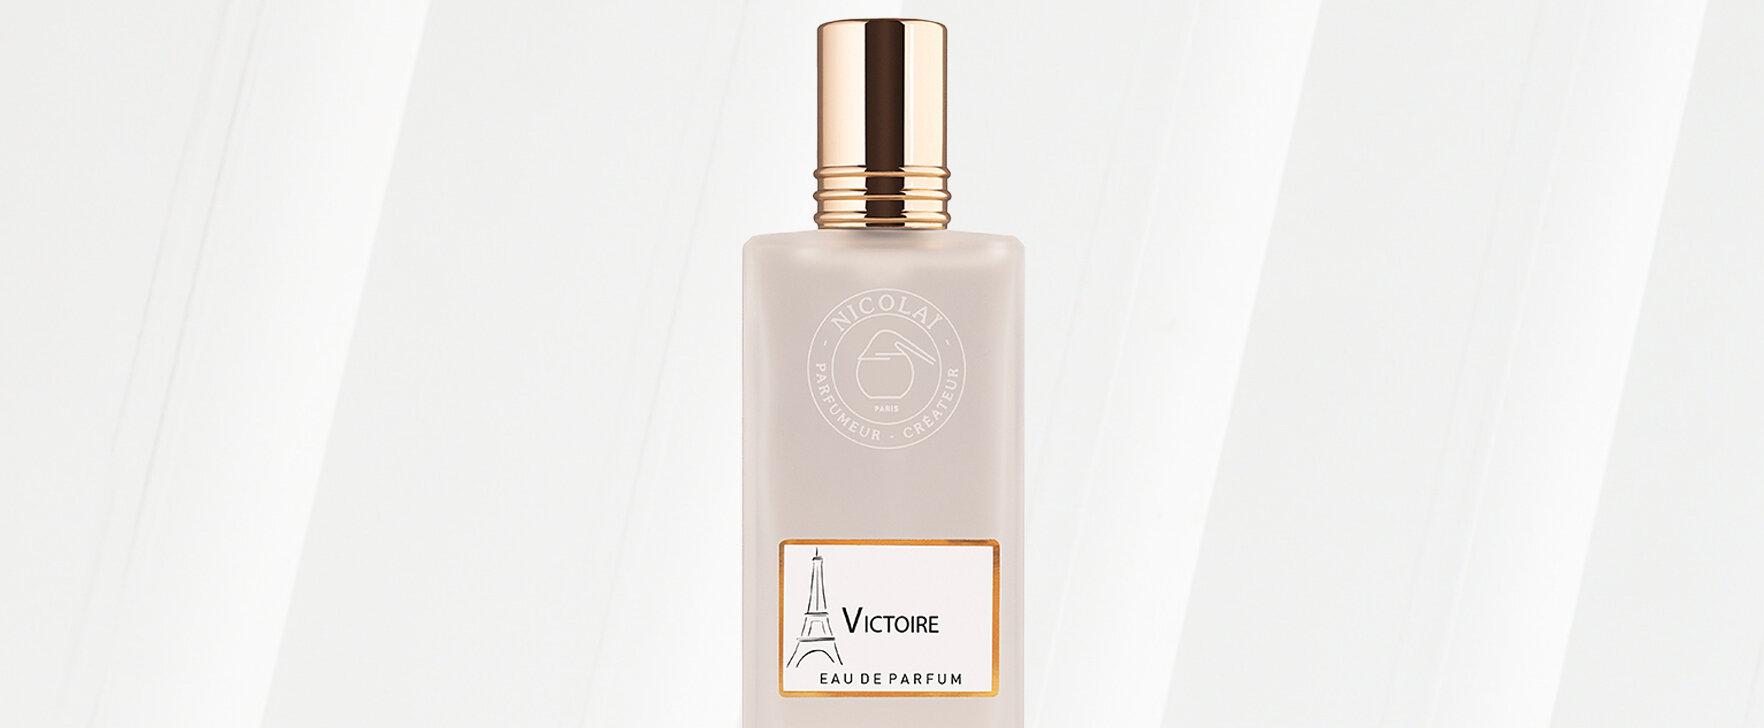 An Ode to Sporting Excellence: The Limited-Edition Eau de Parfum "Victoire" by Nicolaï